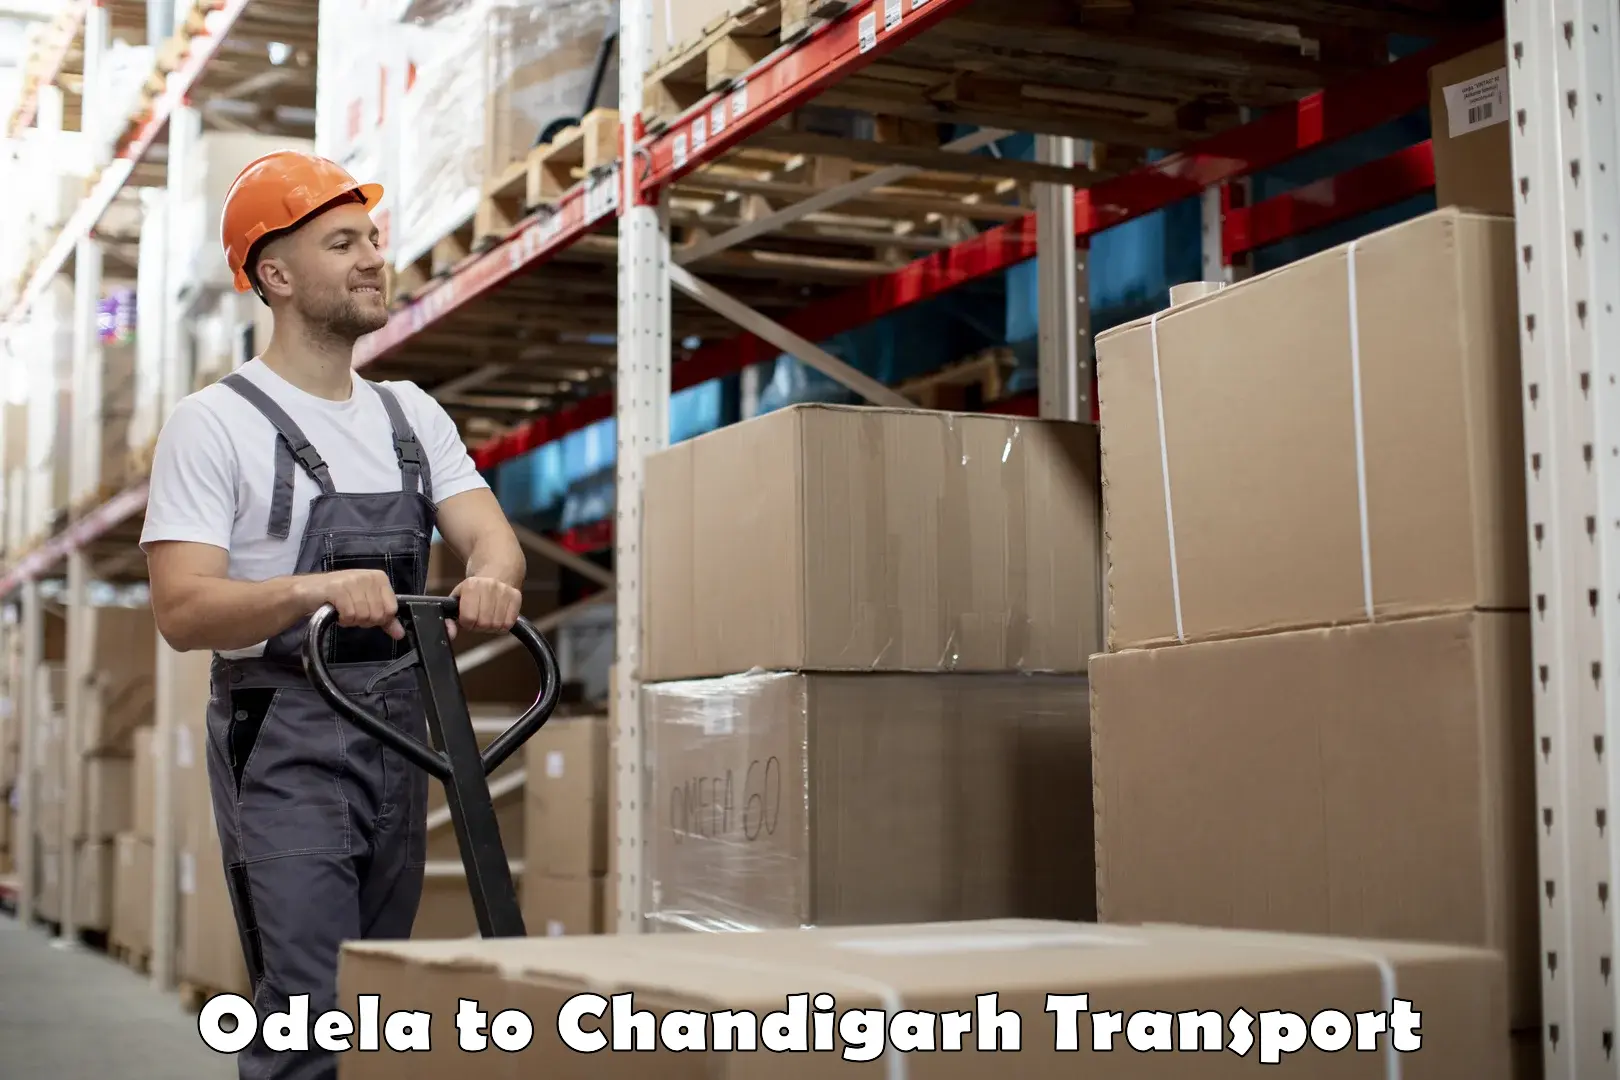 Truck transport companies in India Odela to Chandigarh